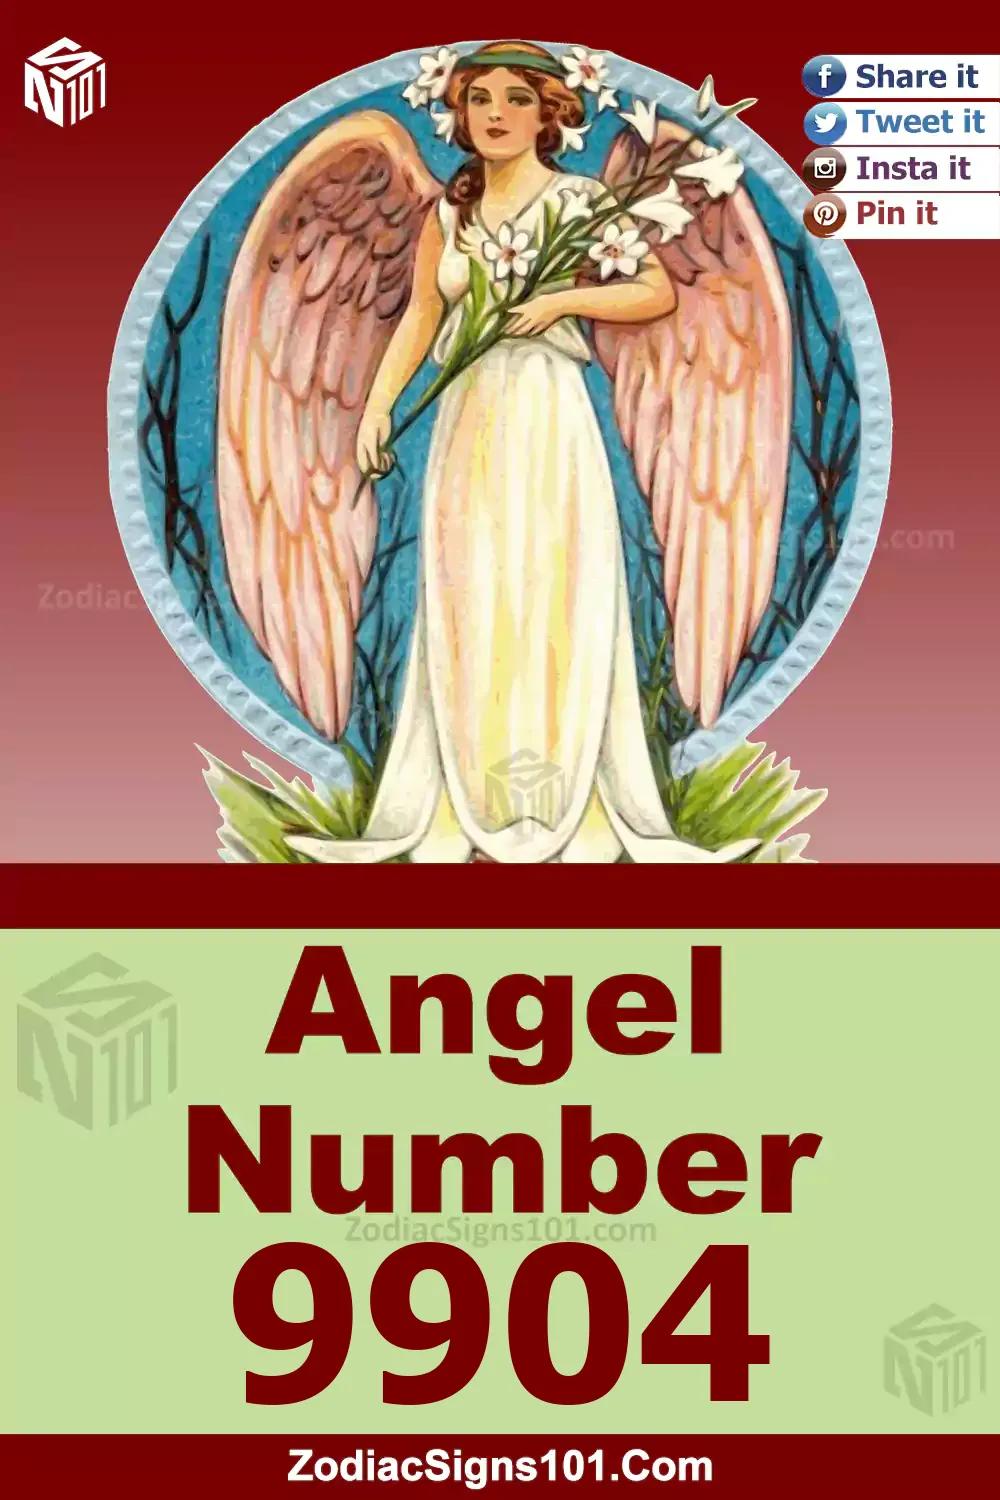 9904 Angel Number Meaning